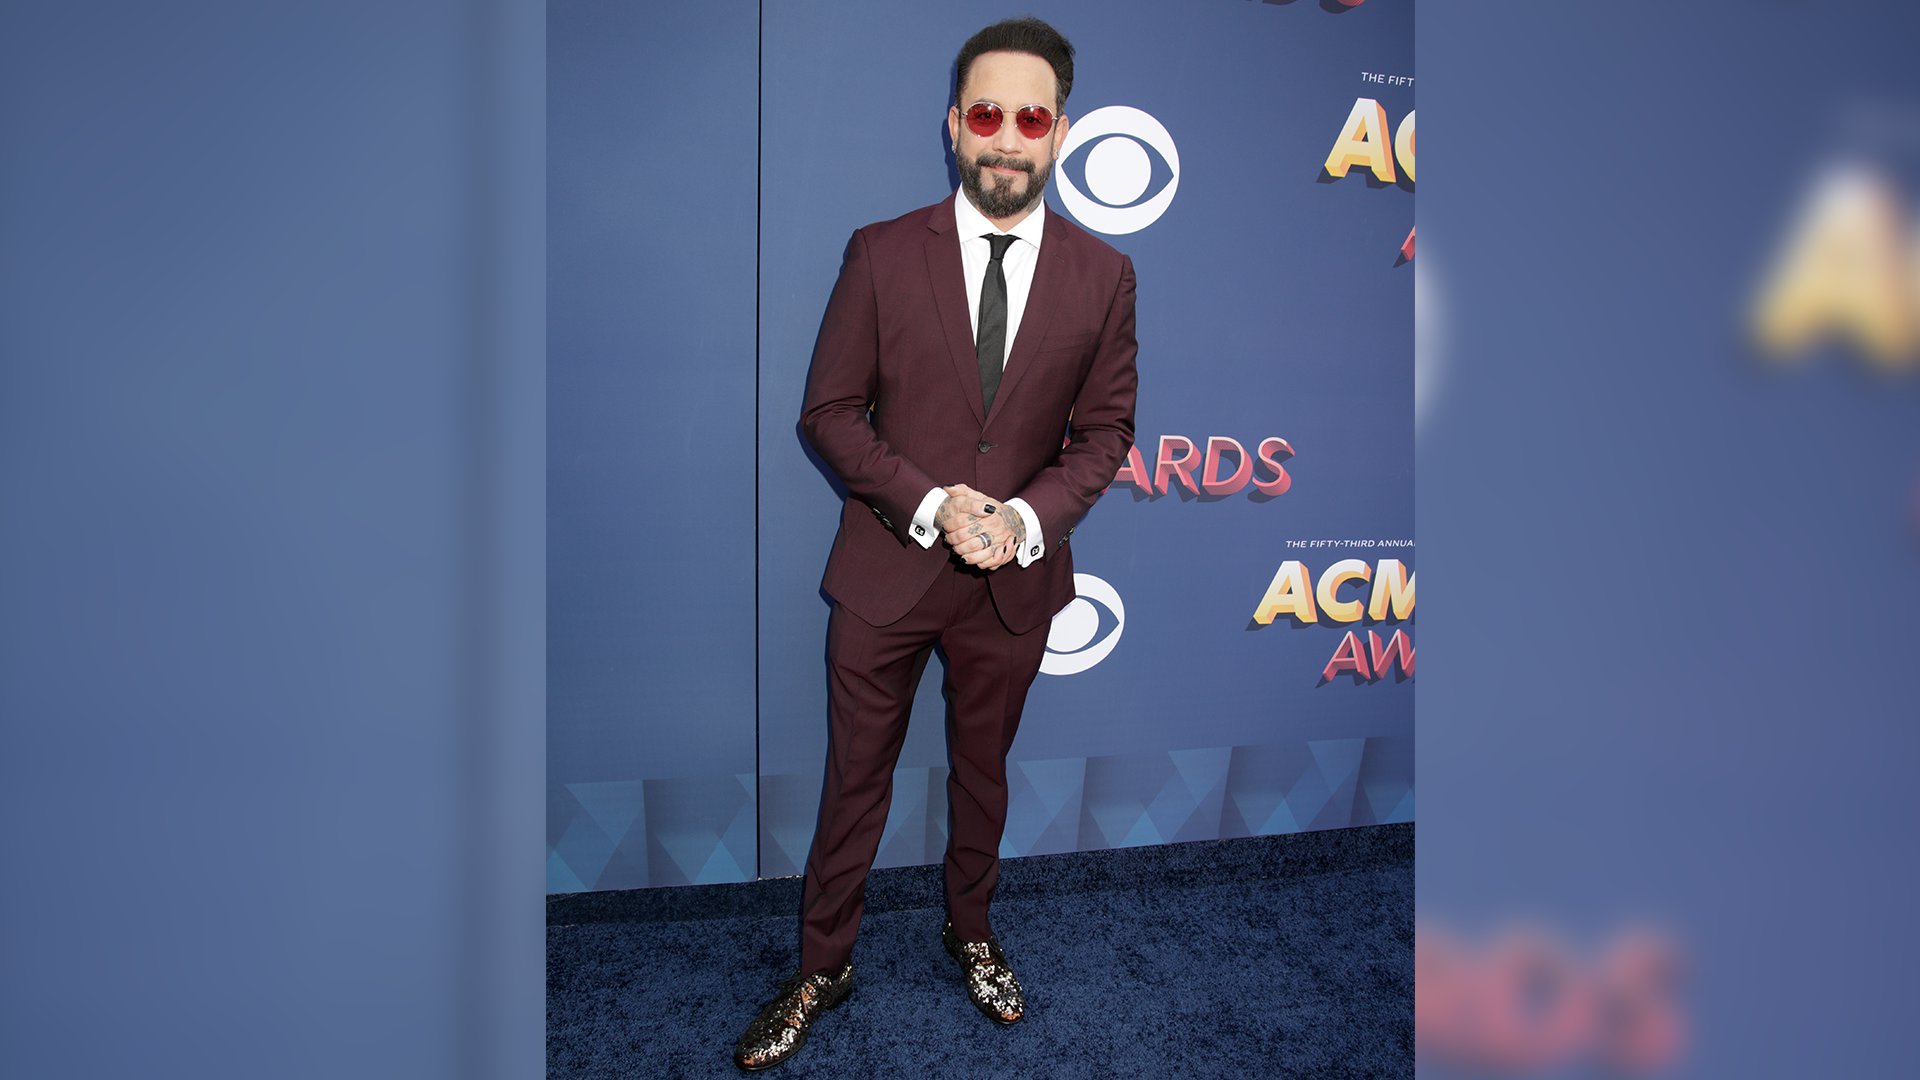 After performing with Florida Georgia Line last year, Backstreet Boys' AJ McLean is back in Vegas for Country Music's Party of the Year.